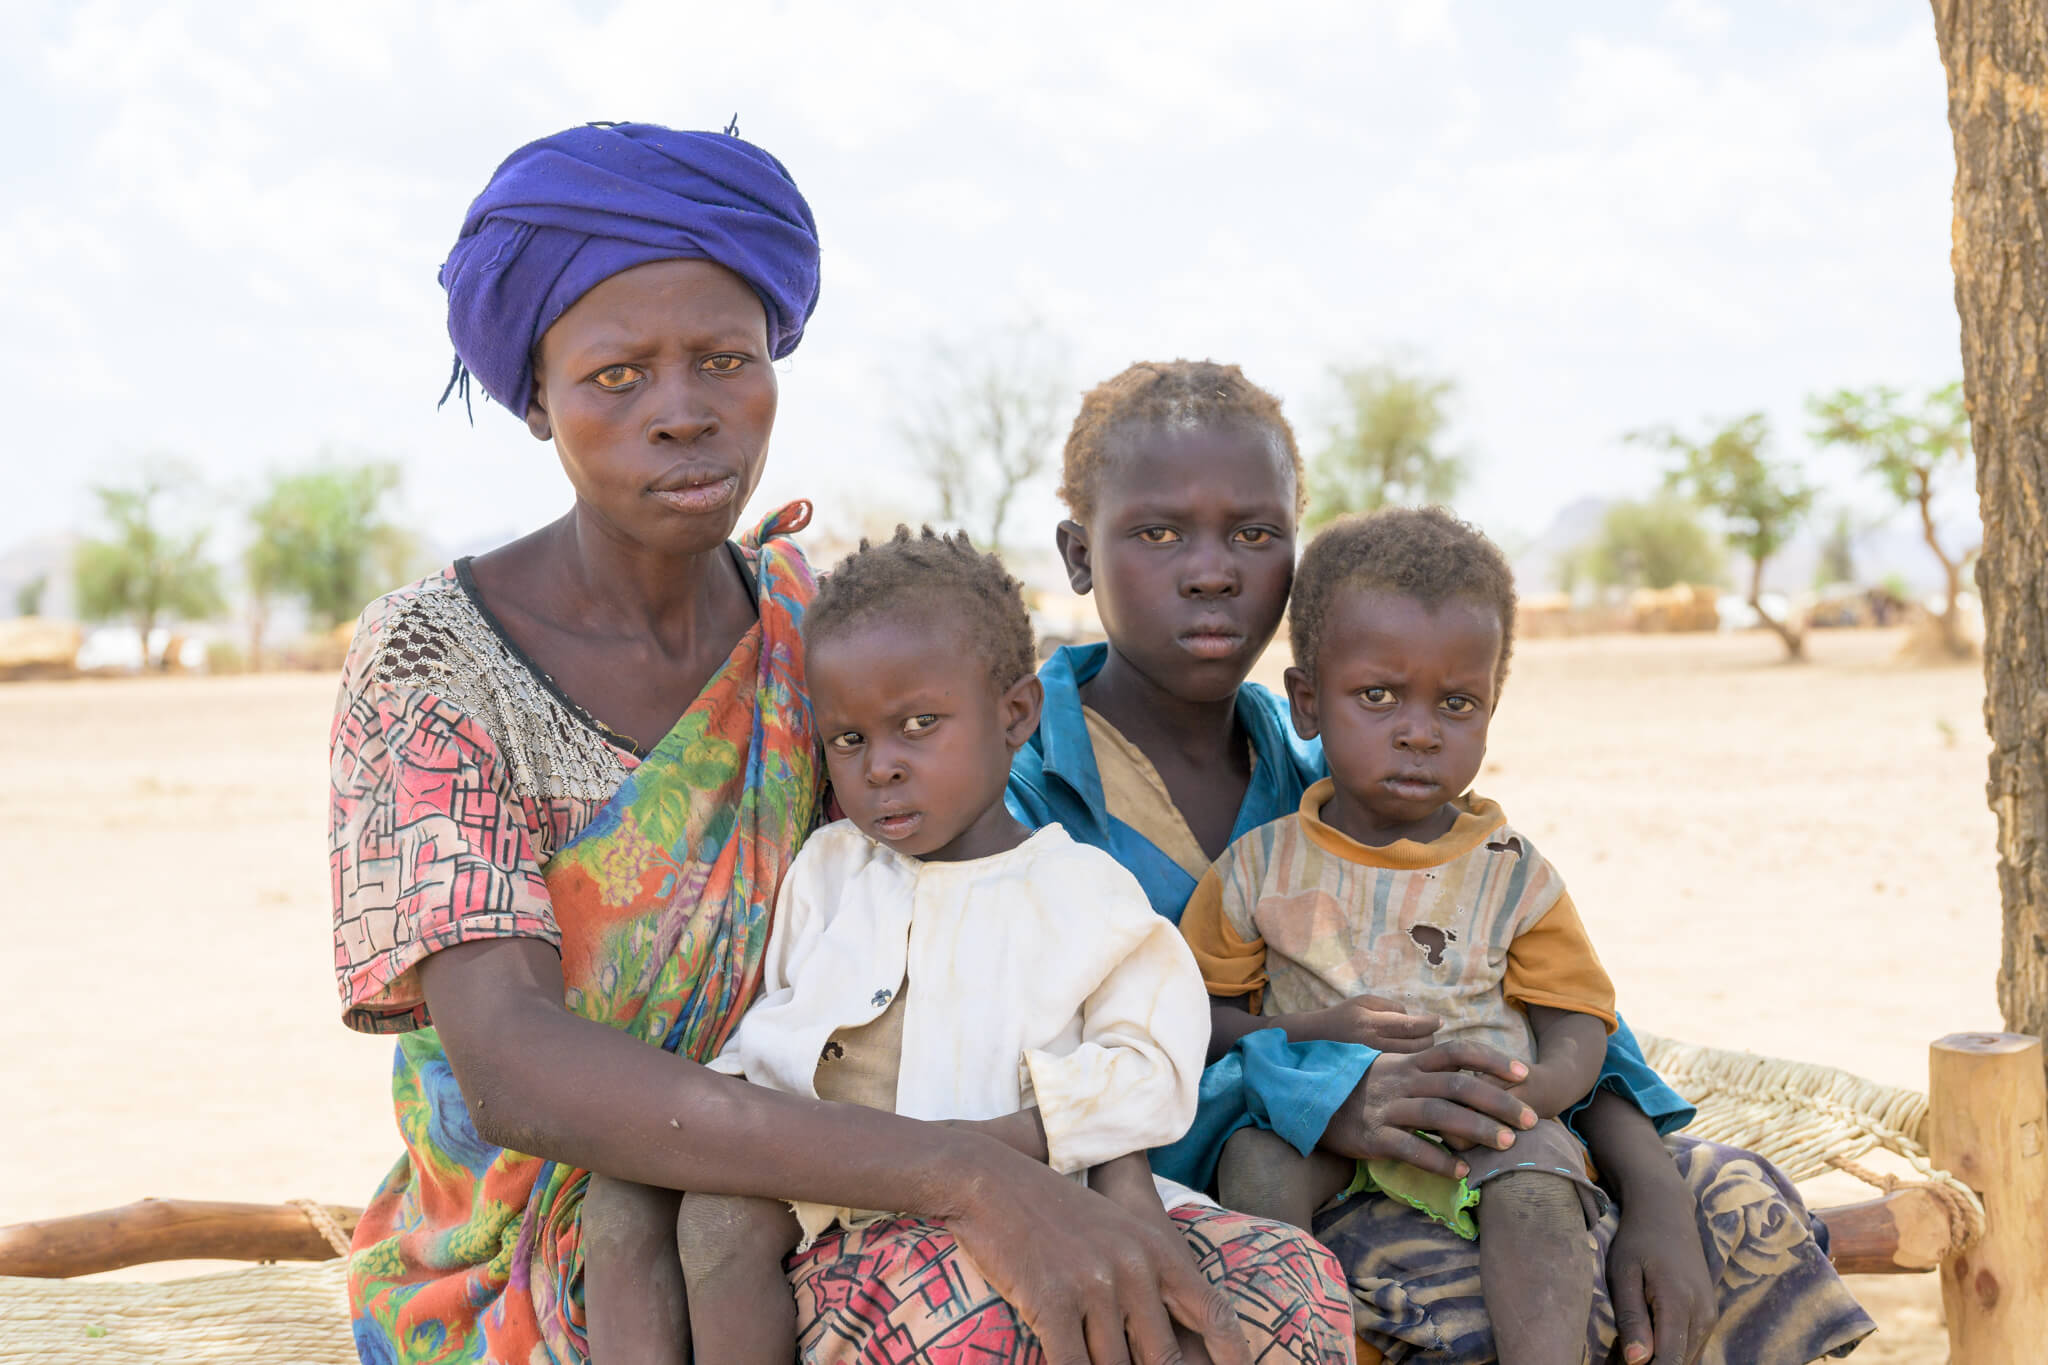 Dara escaped violent conflict in her hometown, but now her and her family face a new challenge in the camp: starvation.